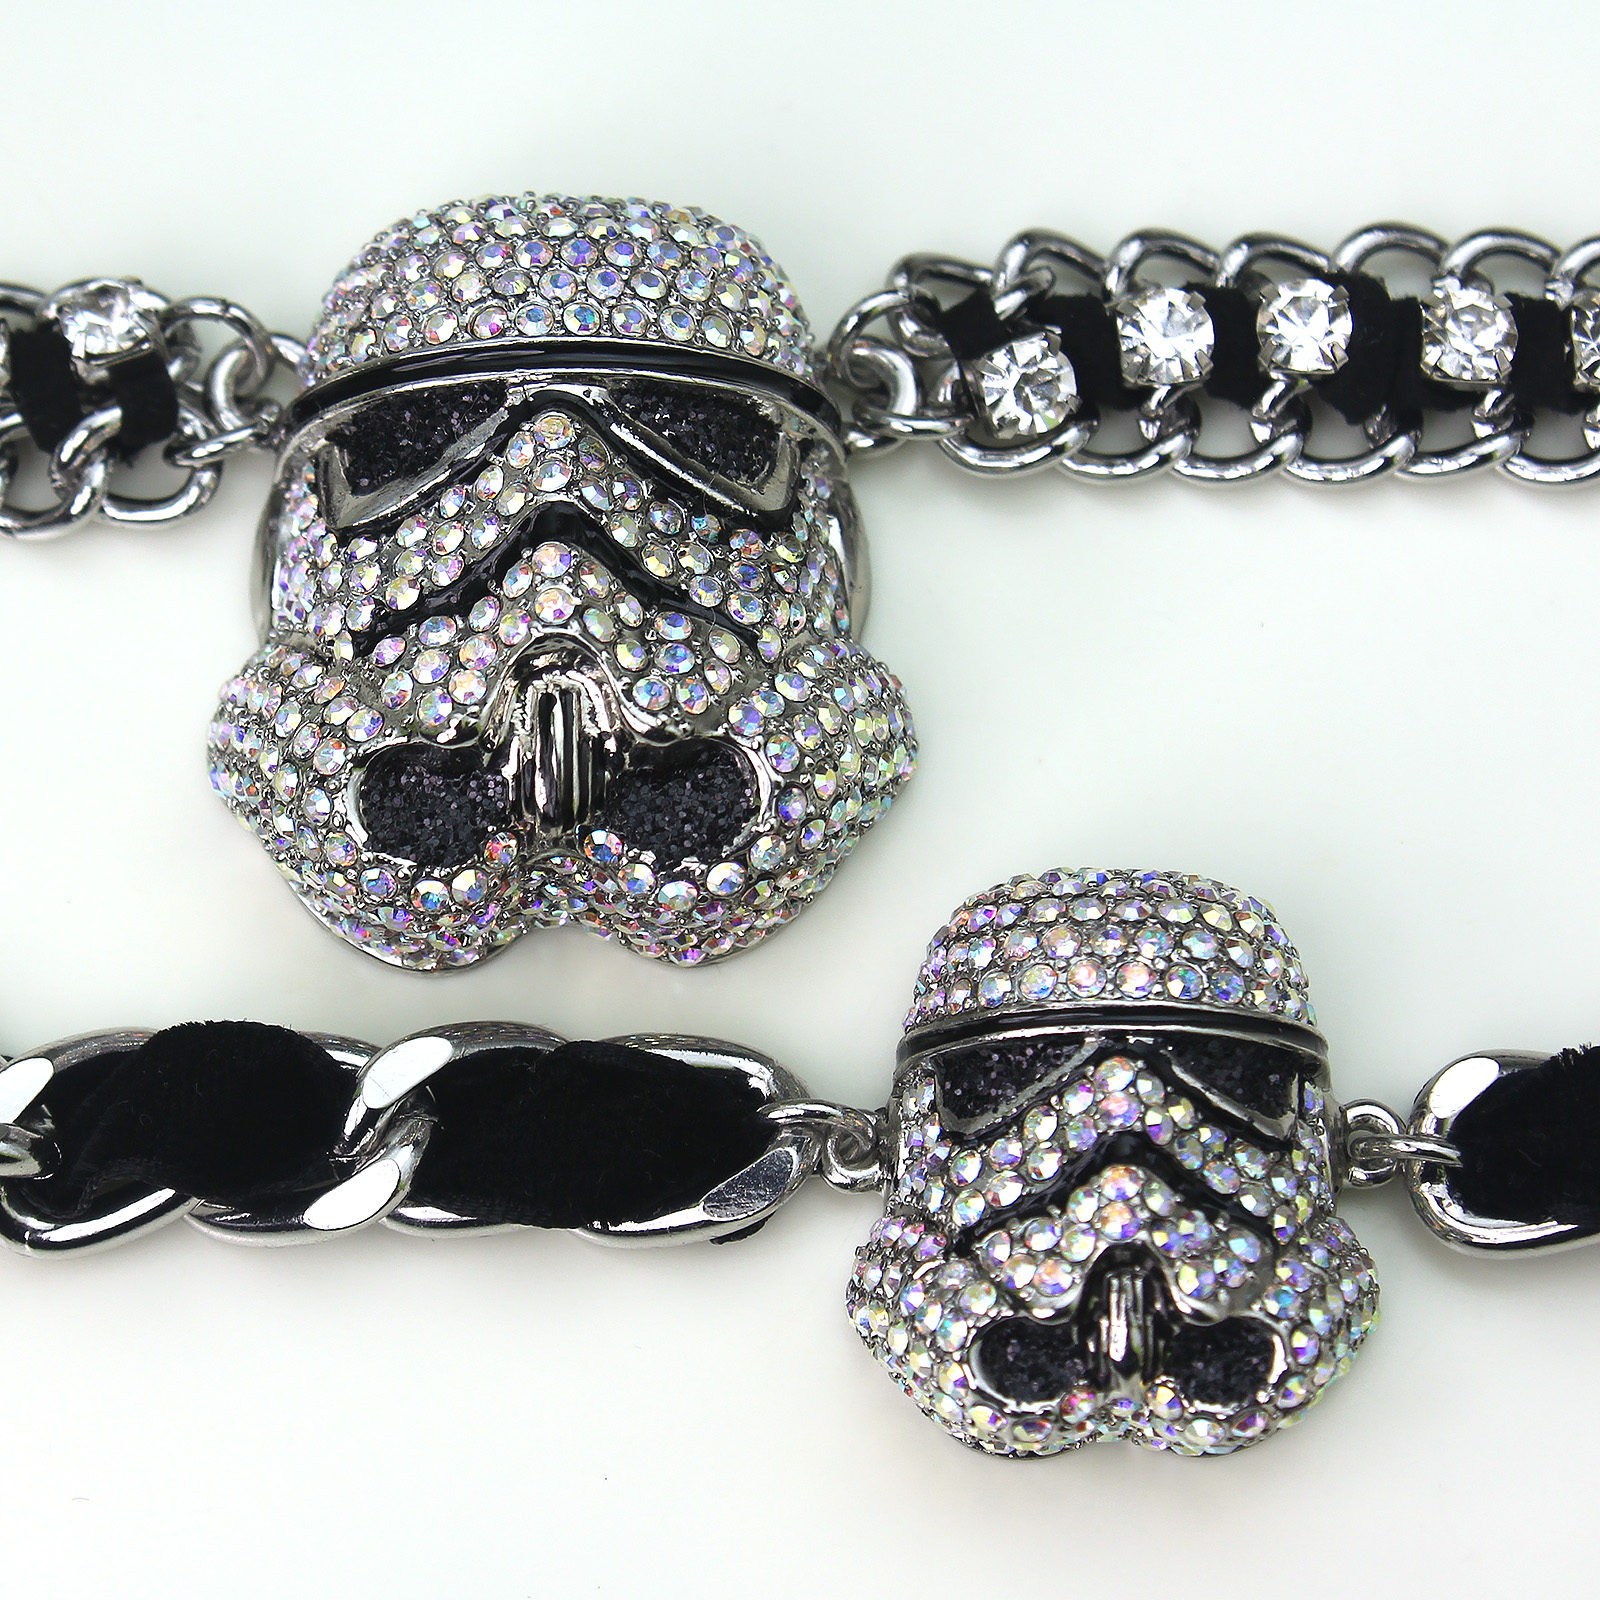 HSN - 'bling' Stormtrooper helmet jewelry by SG@NYC, LLC (size comparison)